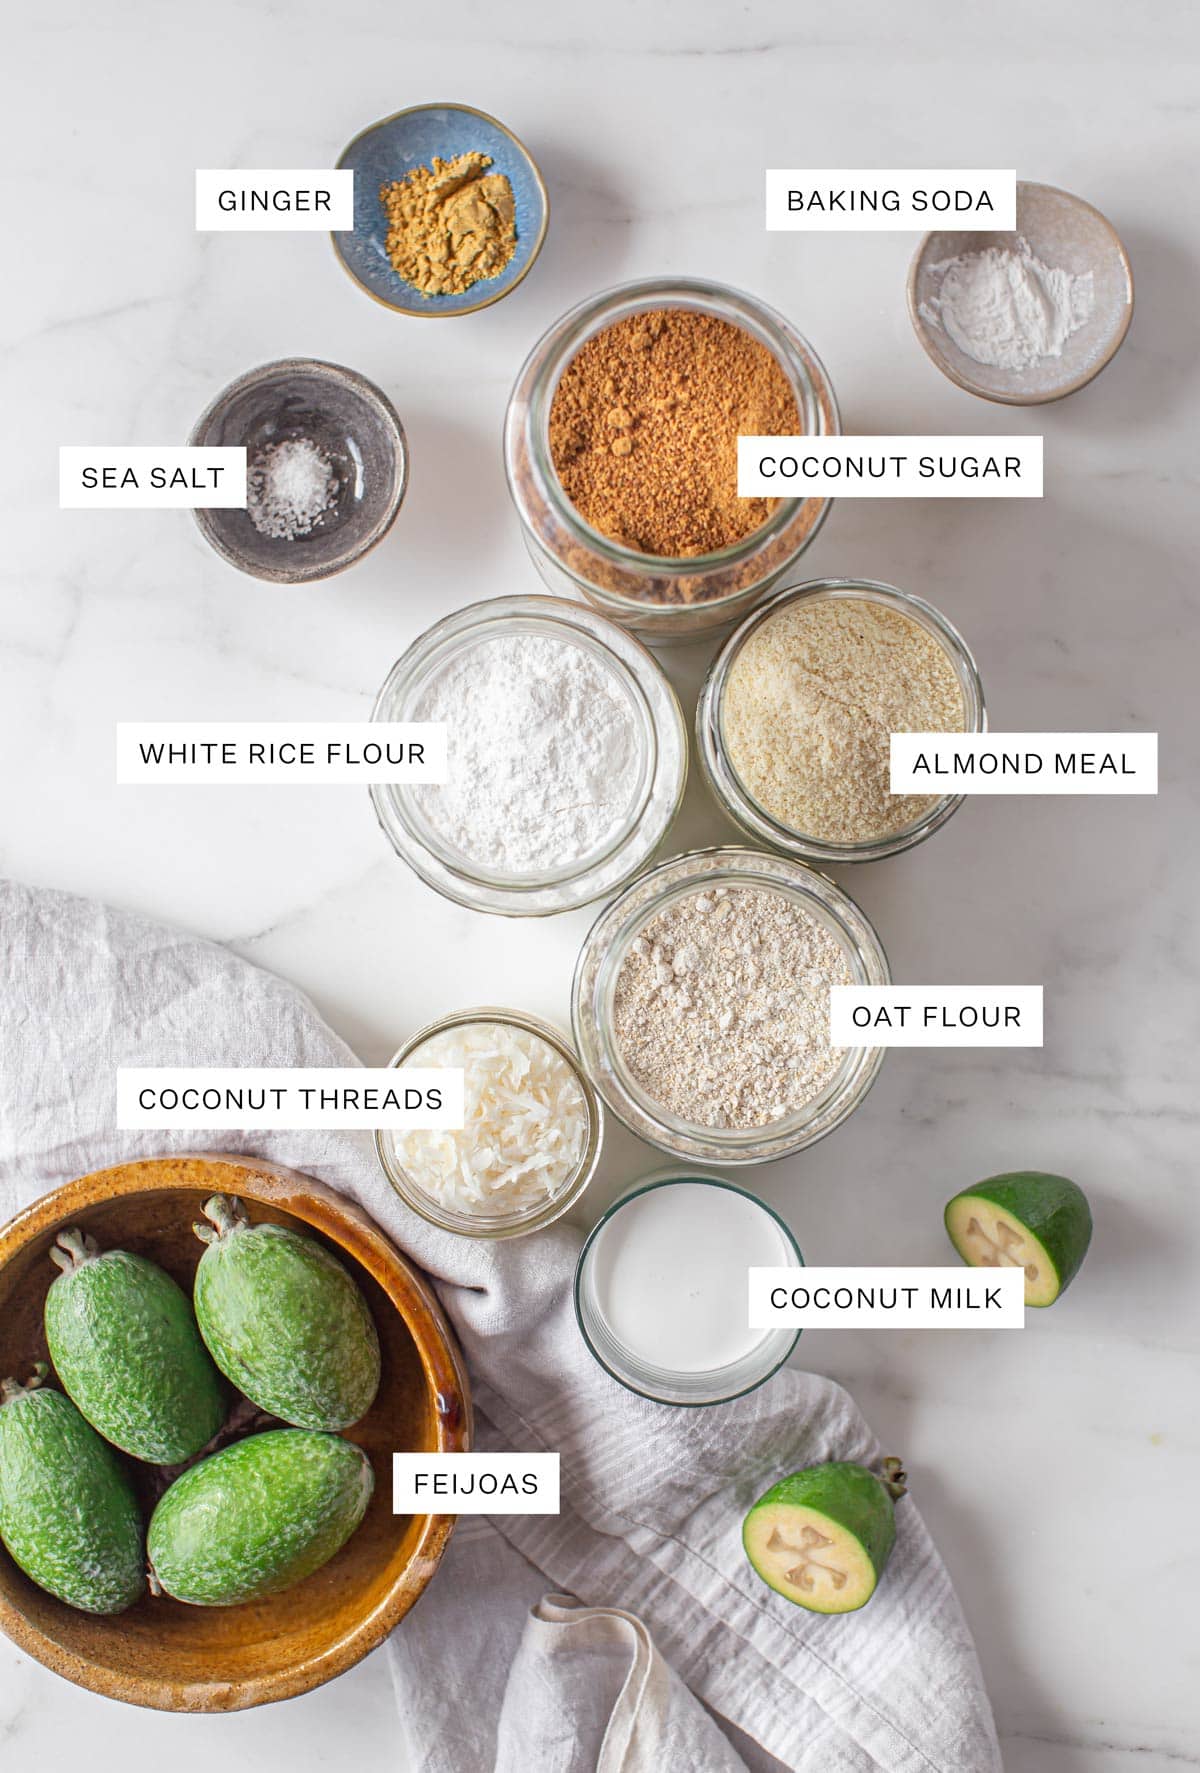 Flat lay of all the ingredients needed to make this recipe, such as several different types of flours, feijoa fruit, spices and coconut.